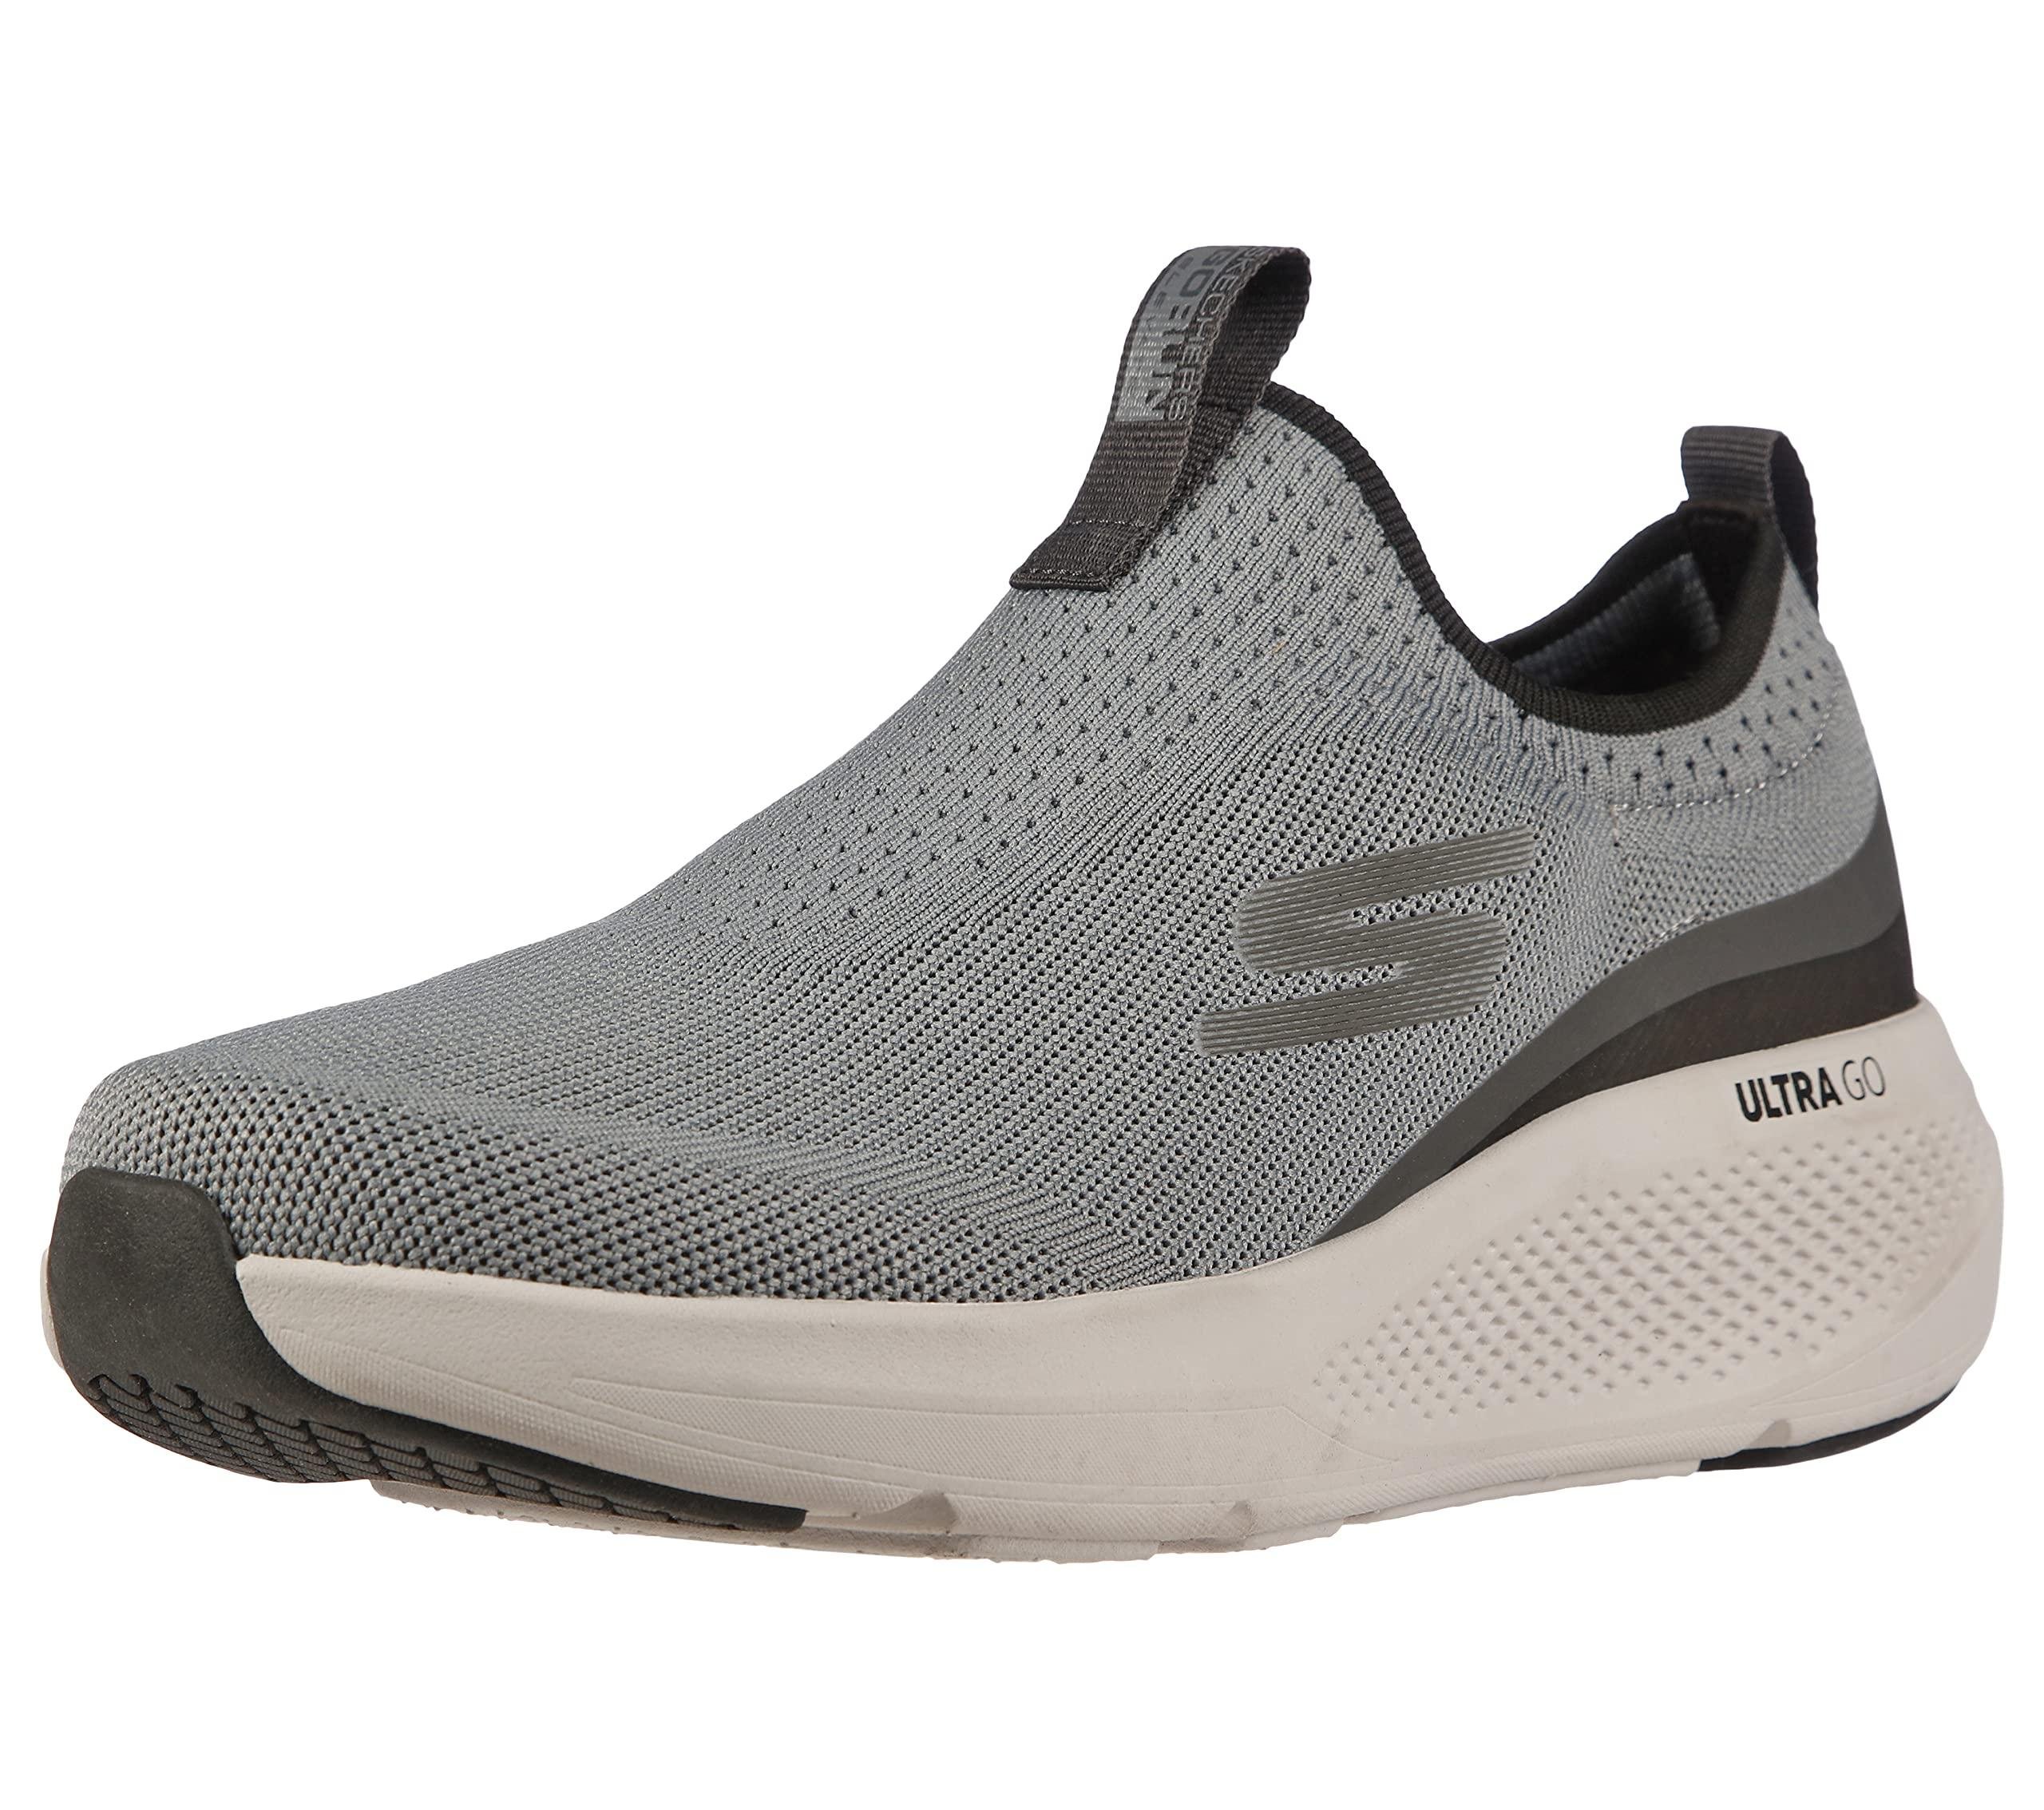 Gorun Elevate-athletic Slip-on Workout Running Shoe Sneaker With Cushioning Gray for Men |